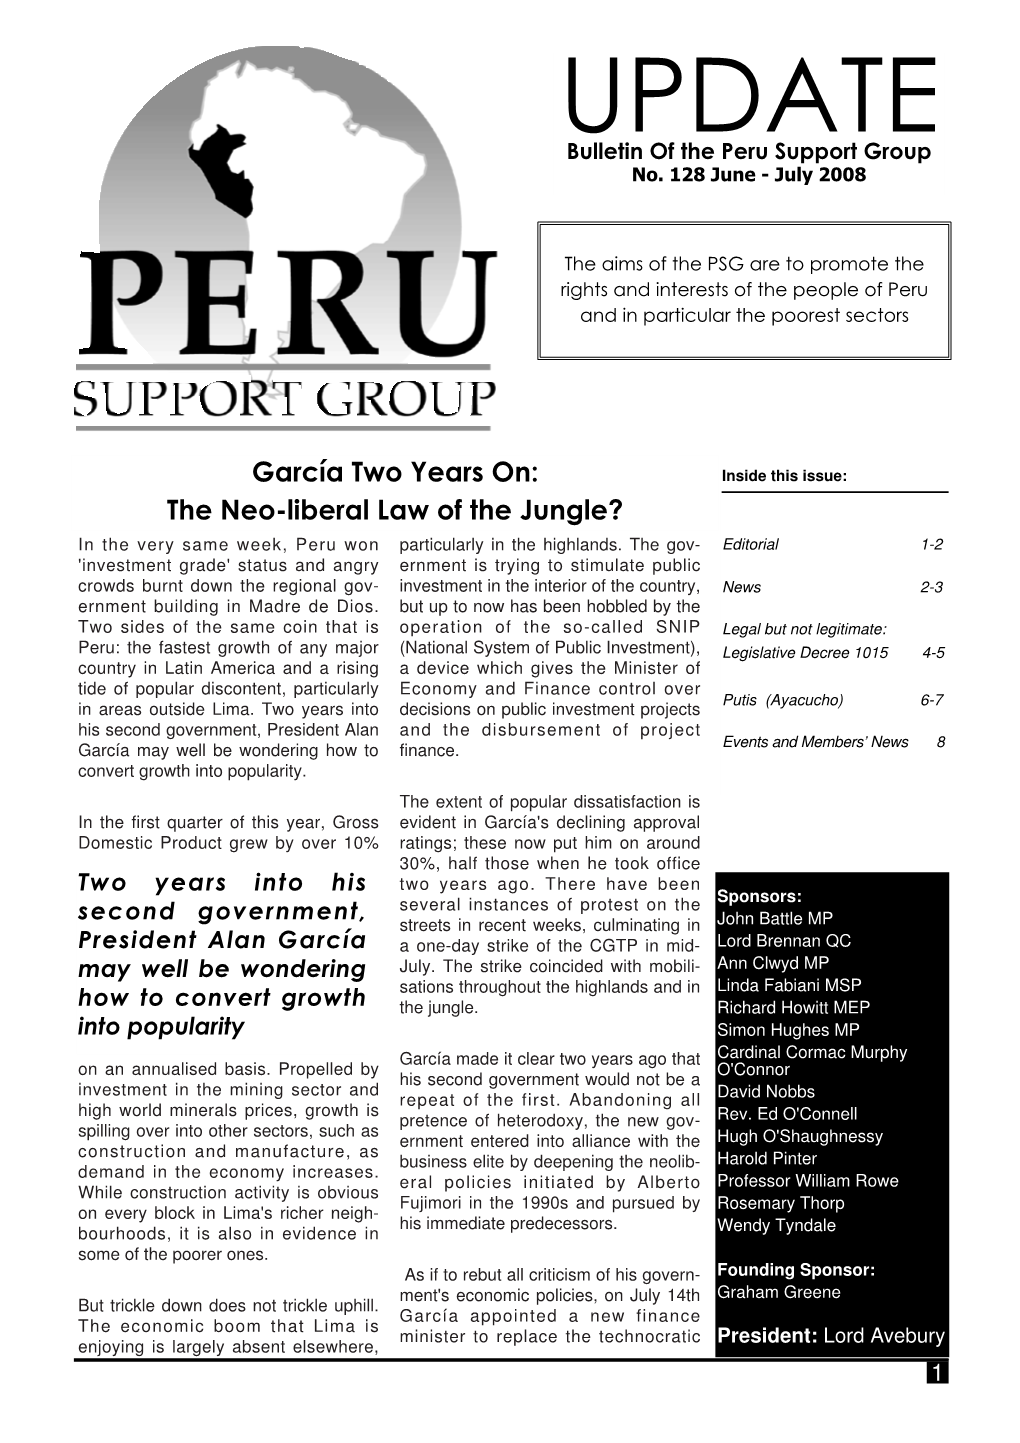 UPDATE Bulletin of the Peru Support Group No